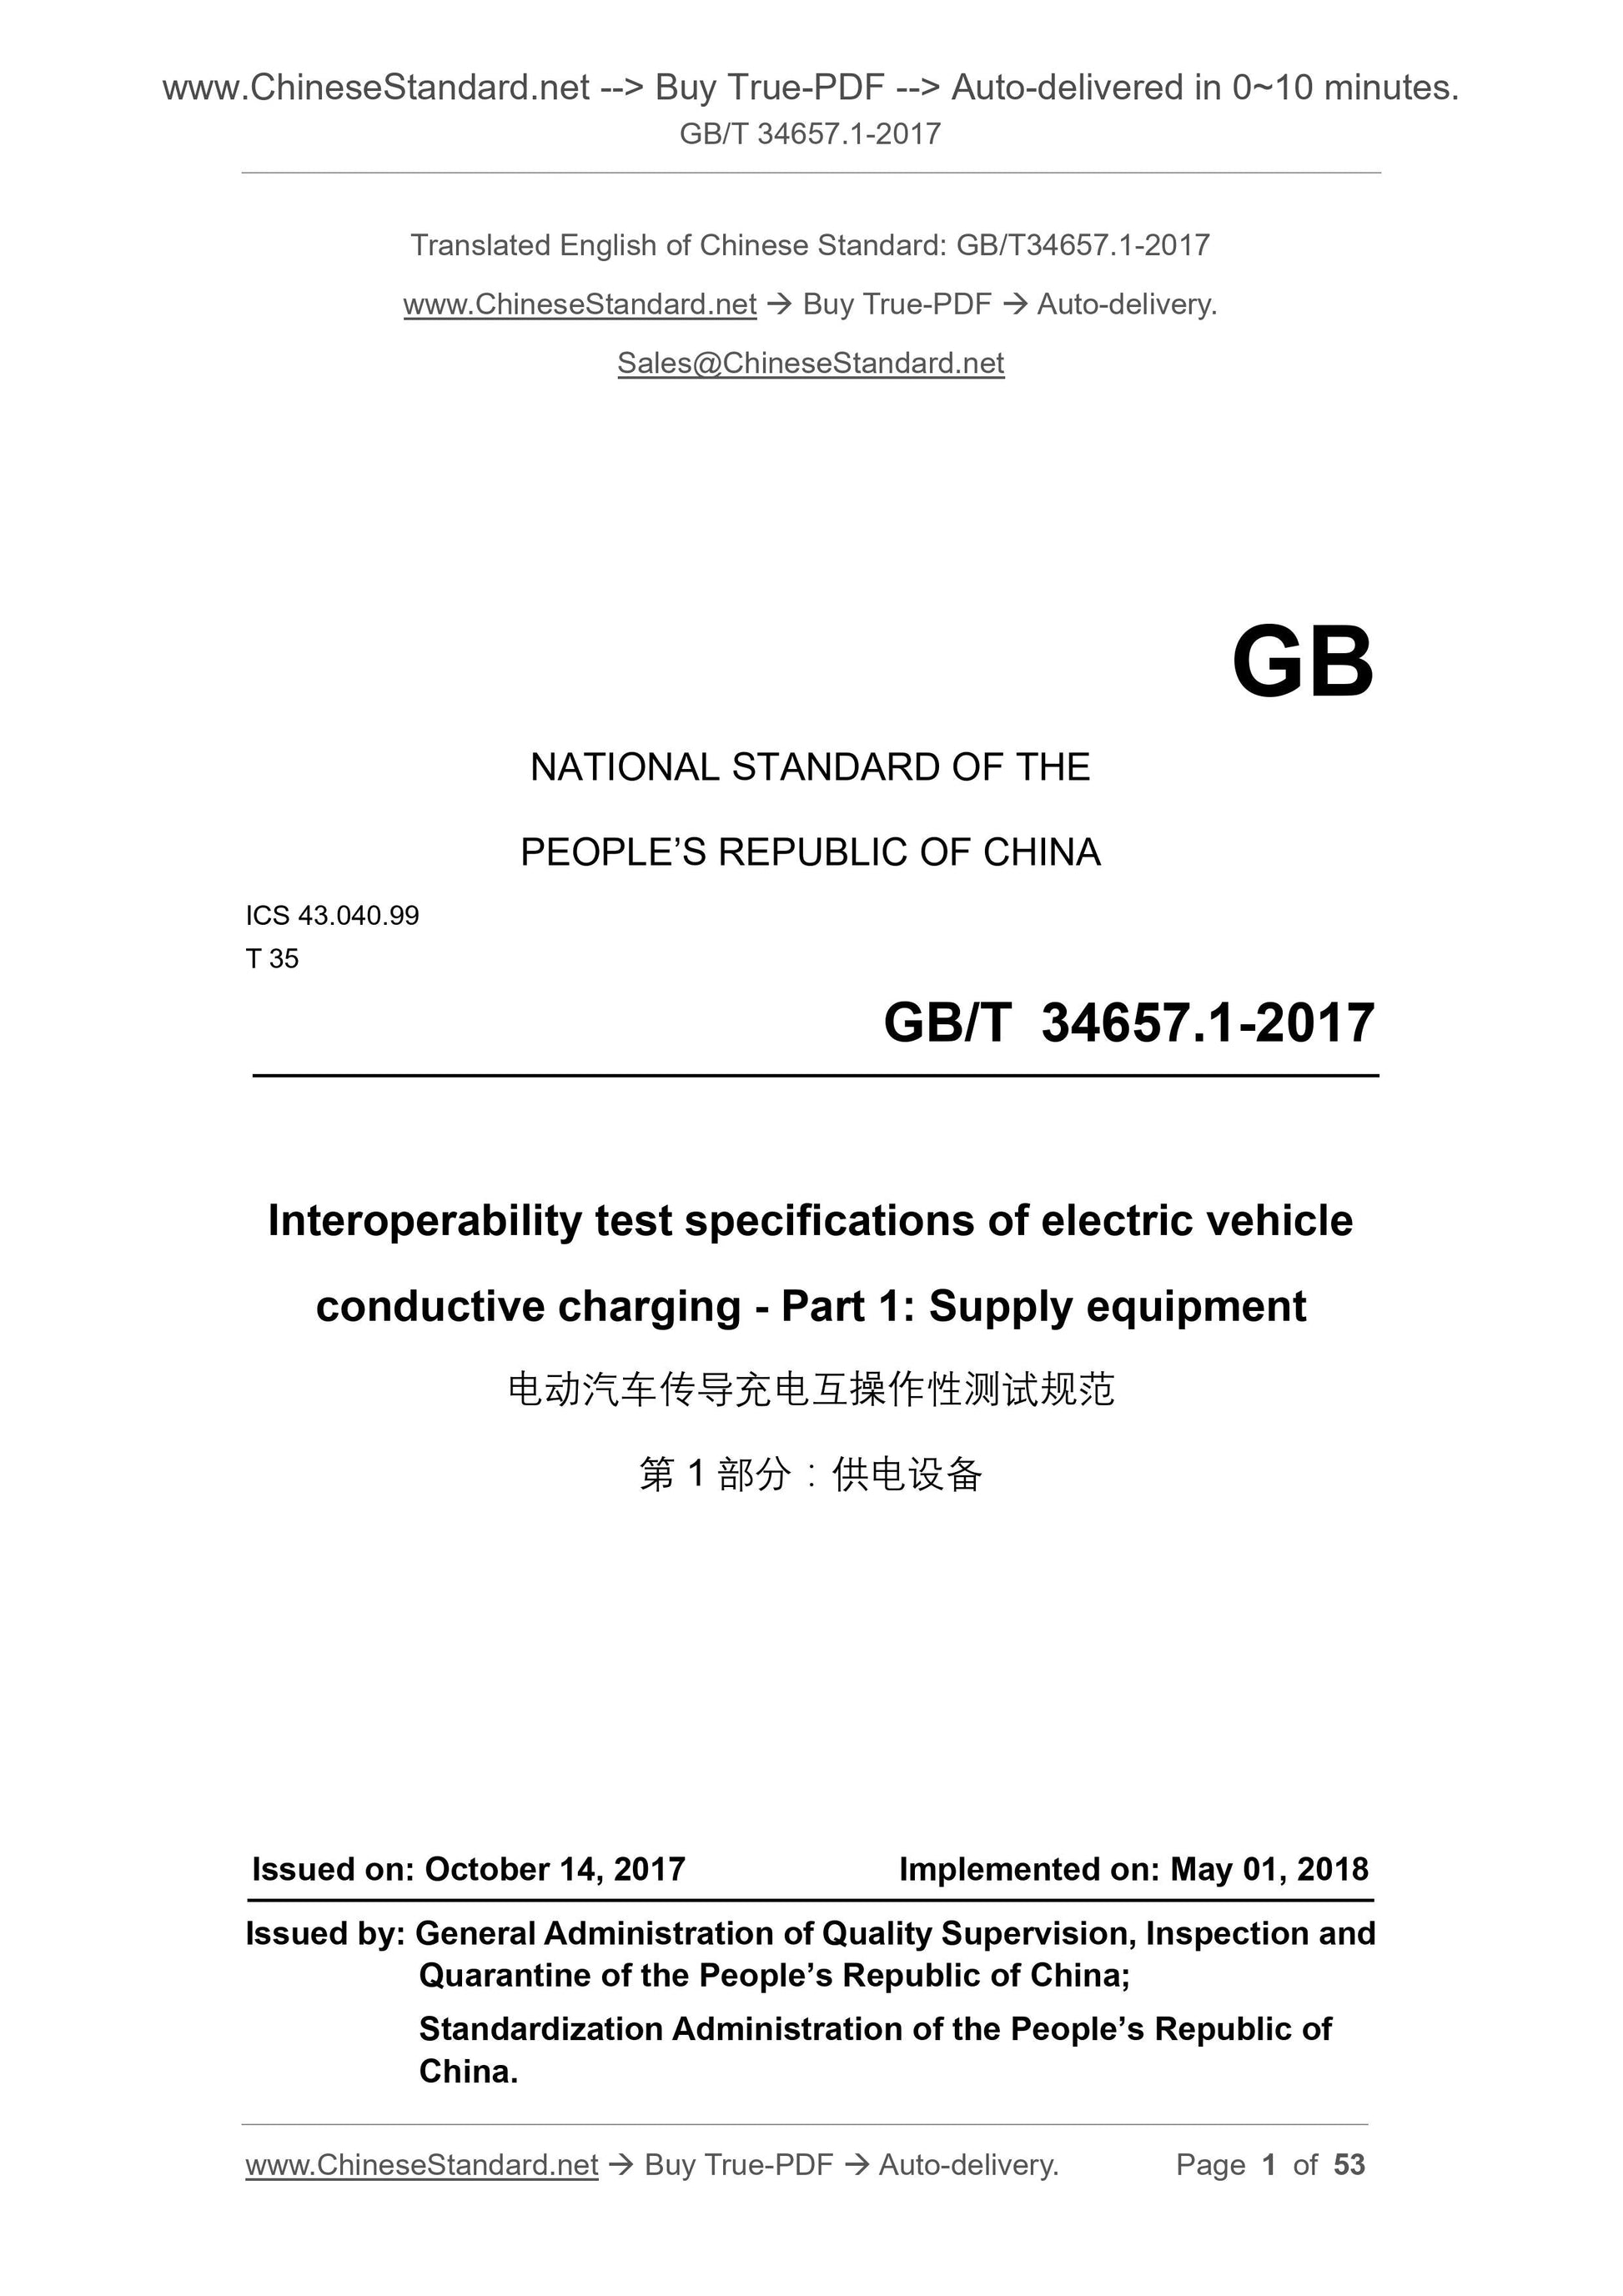 GB/T 34657.1-2017 Page 1